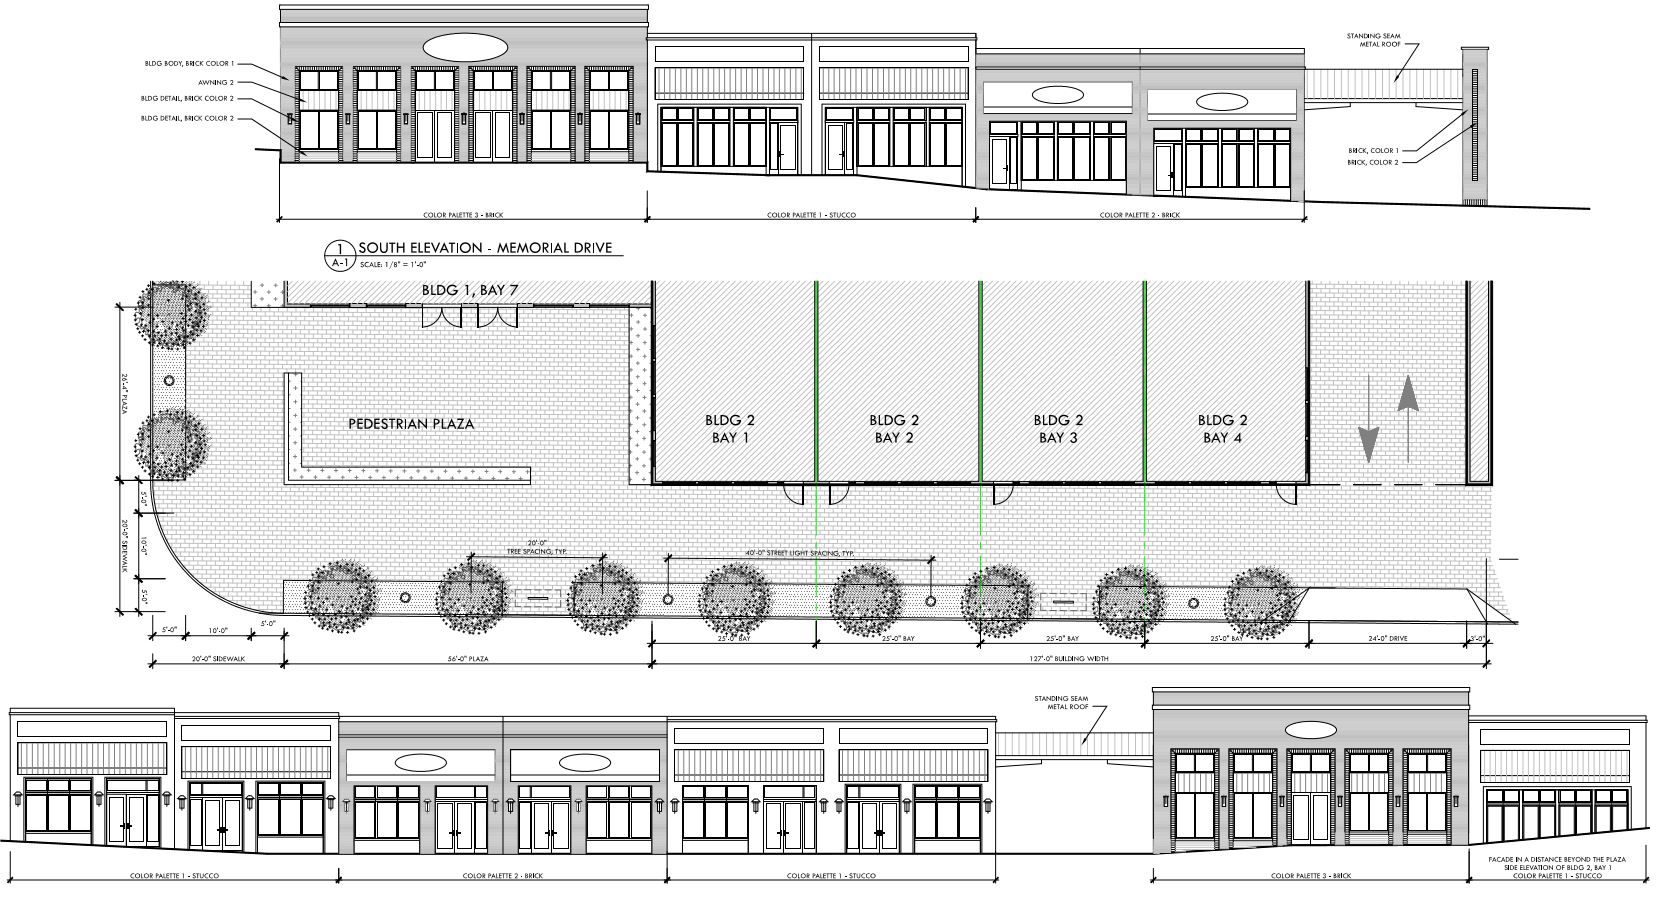 Elevations of single-story brick commercial buildings which look like older storefronts.